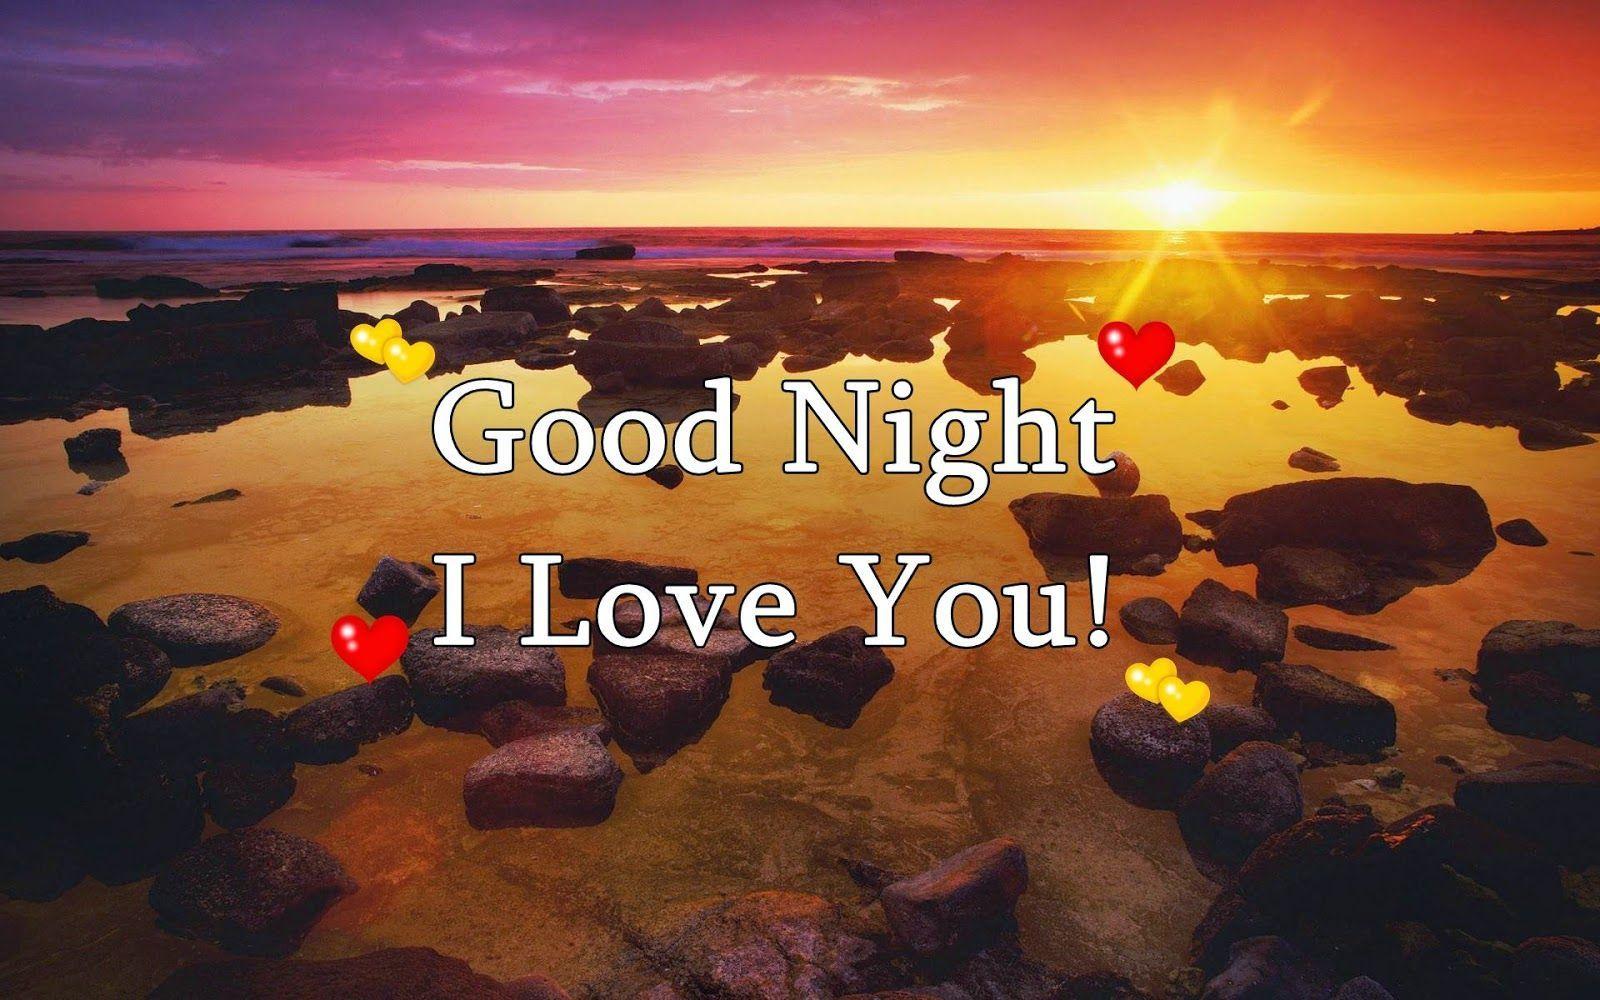 Good Night I Love You Wallpapers - Top Free Good Night I Love You ...